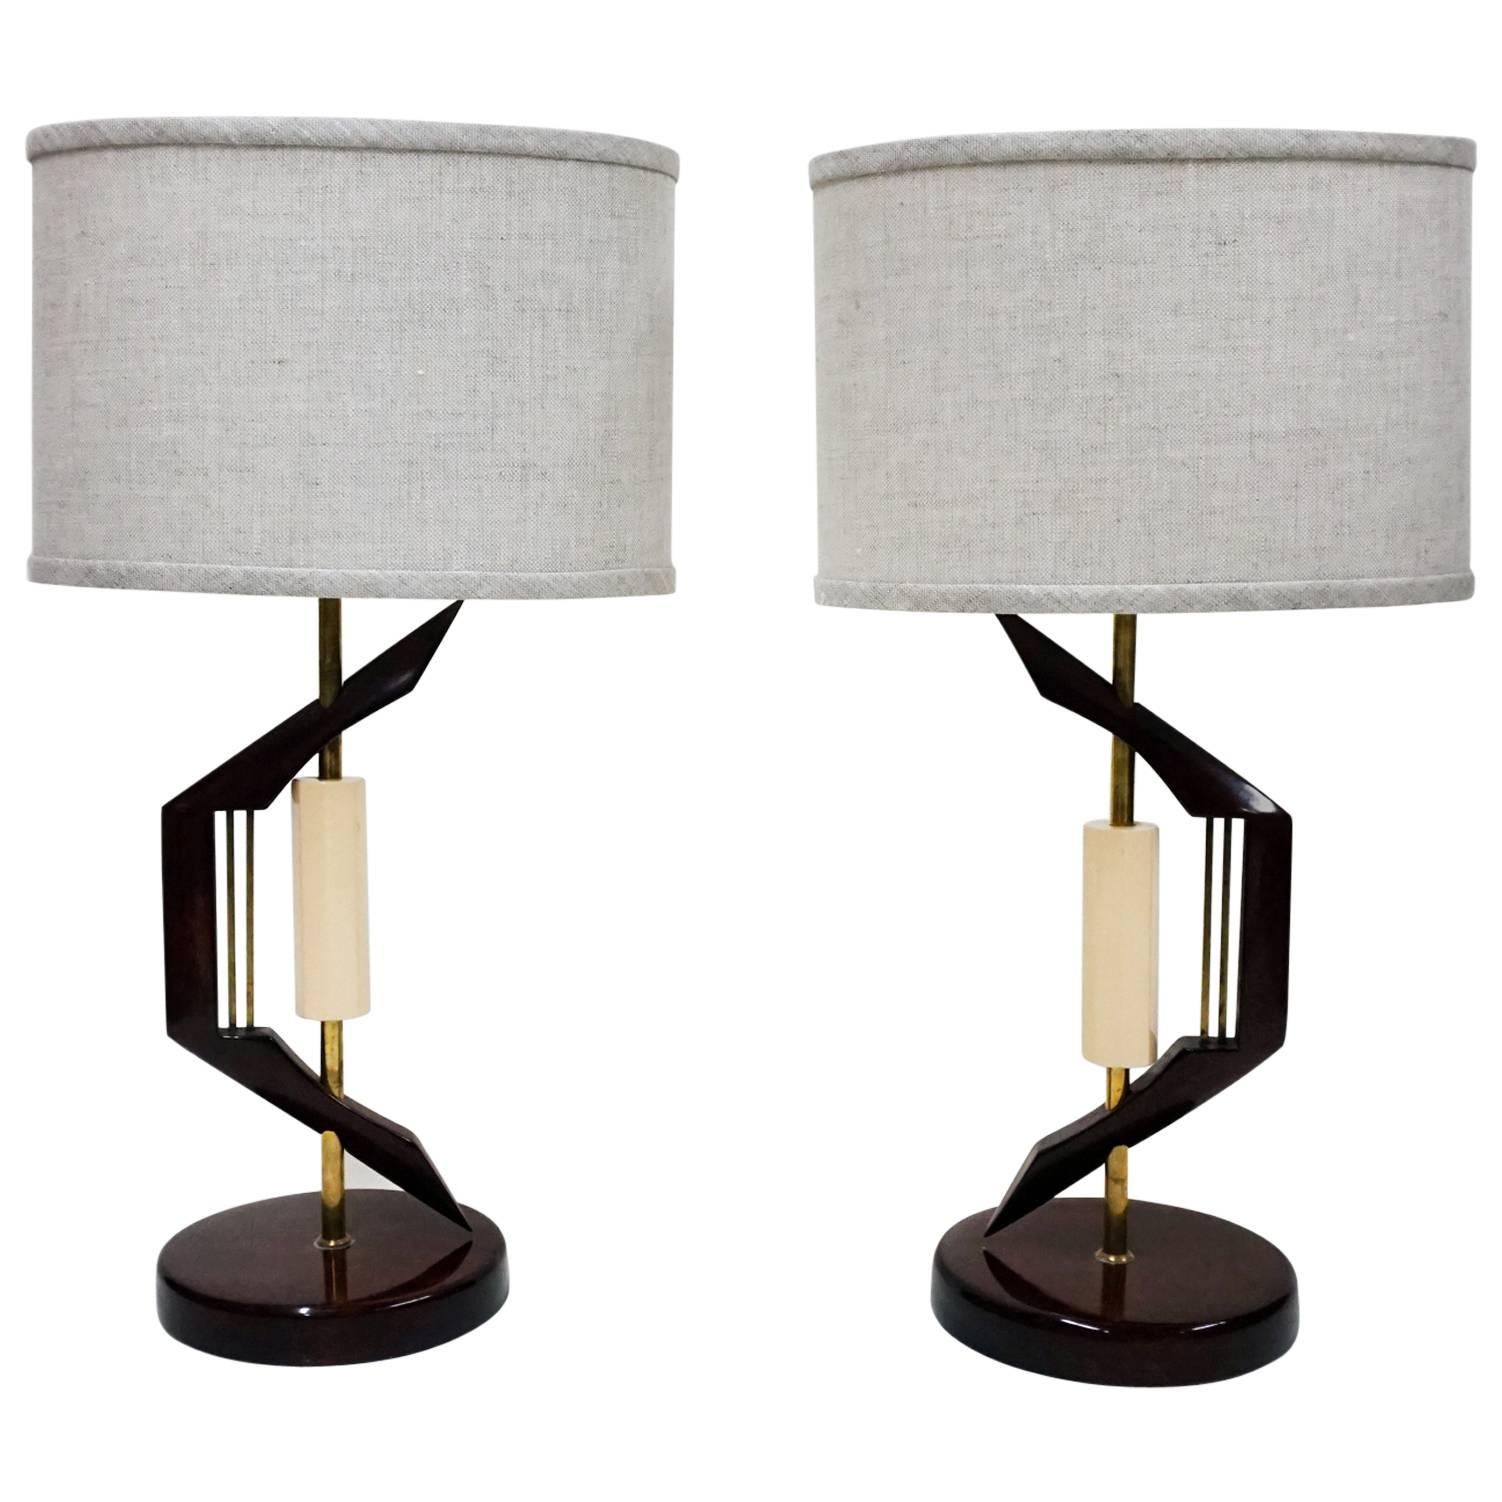 Pair of 1950s Mexican Modern Lamps